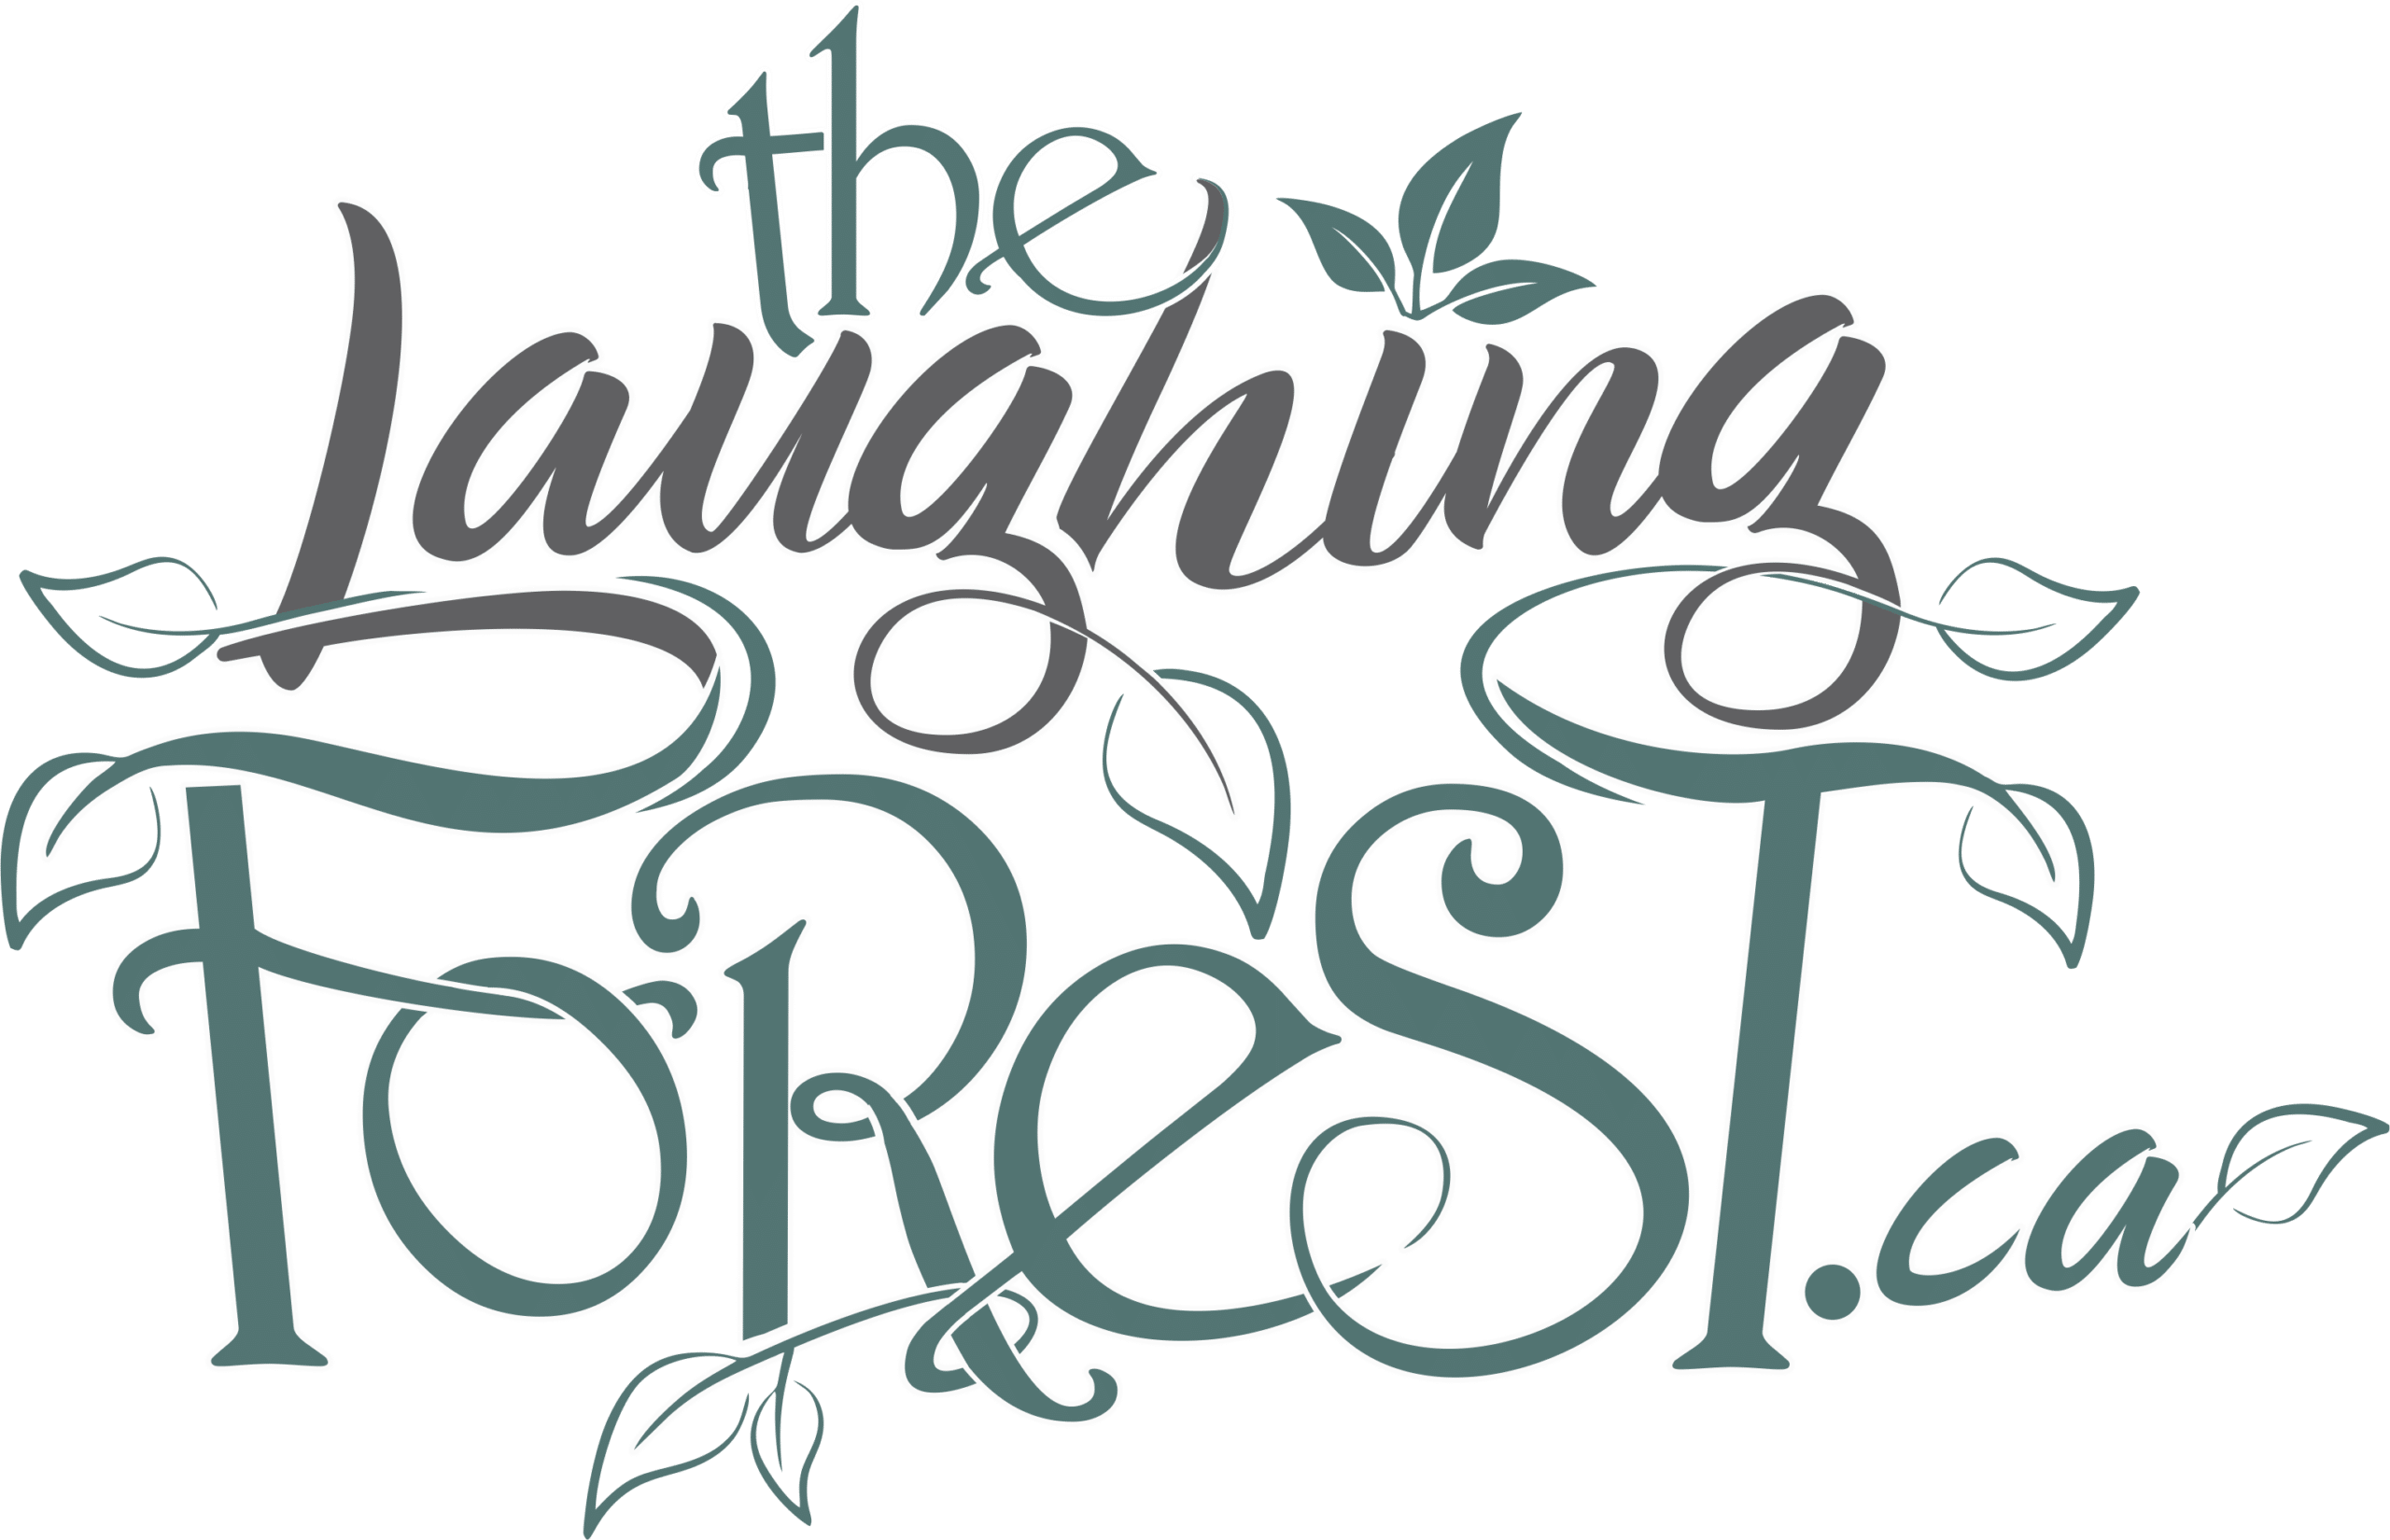 The Laughing Forest